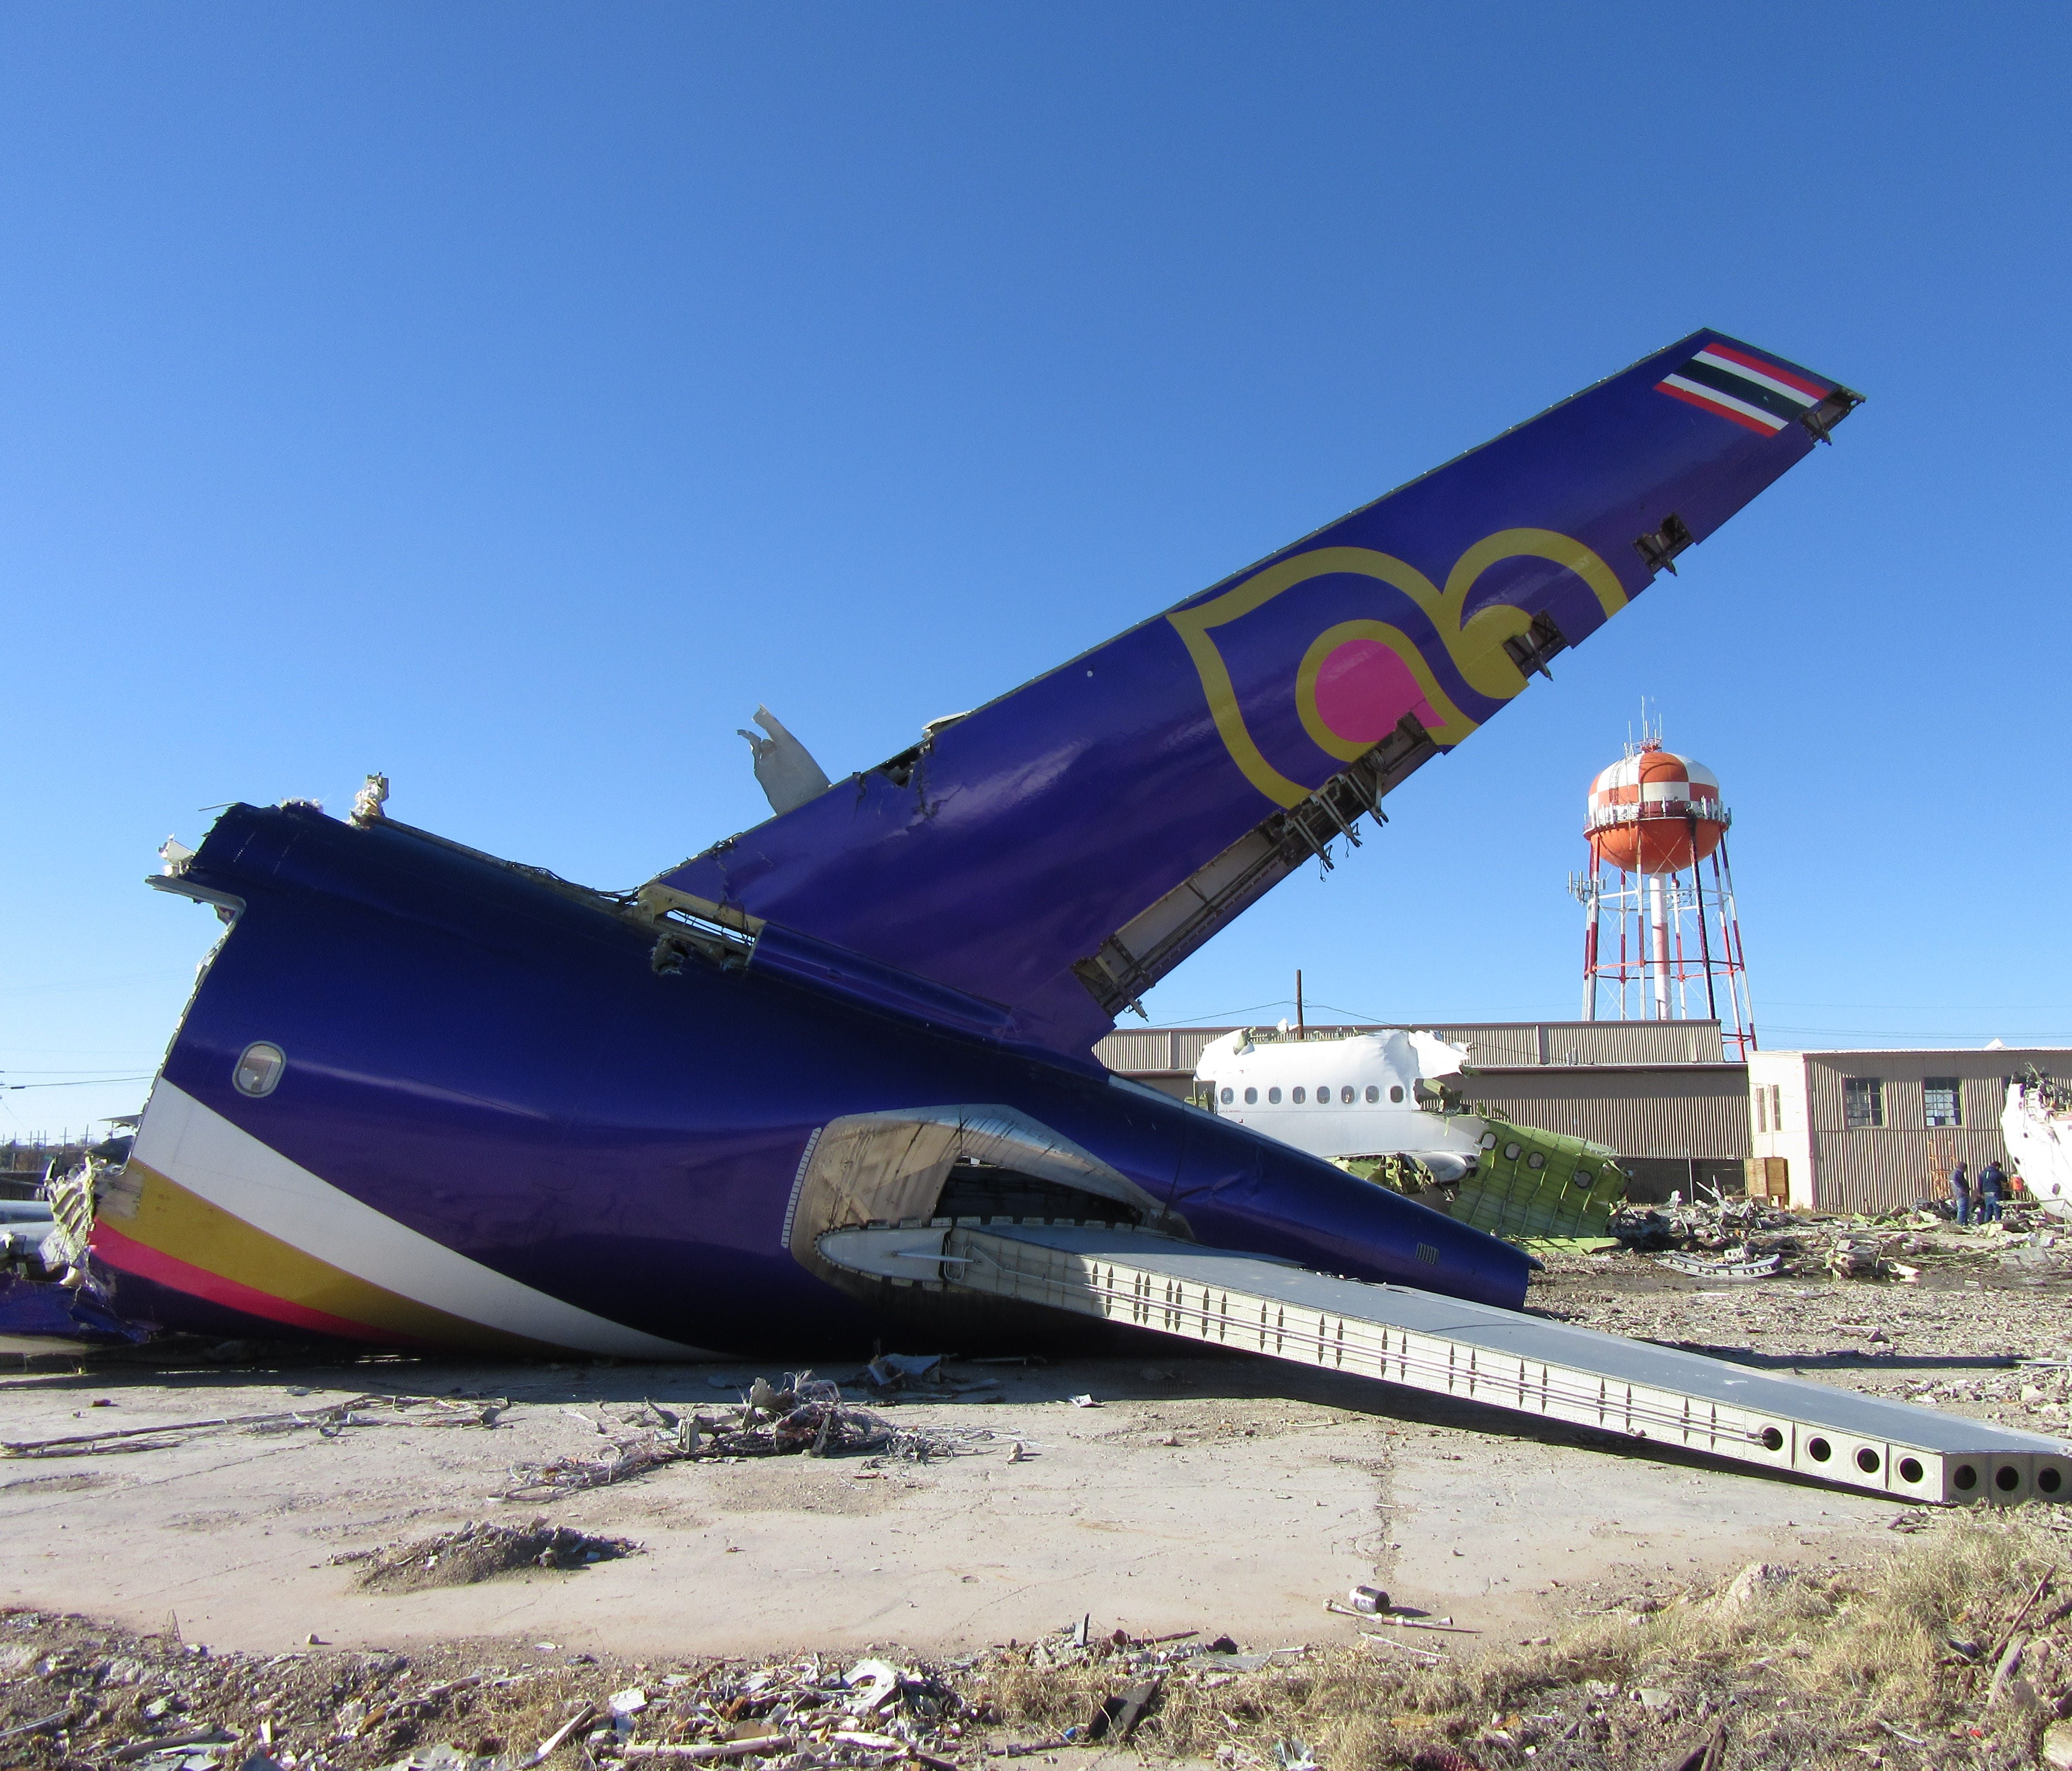 The remains of a Thai Airways Airbus A300 are seen at the Roswell 